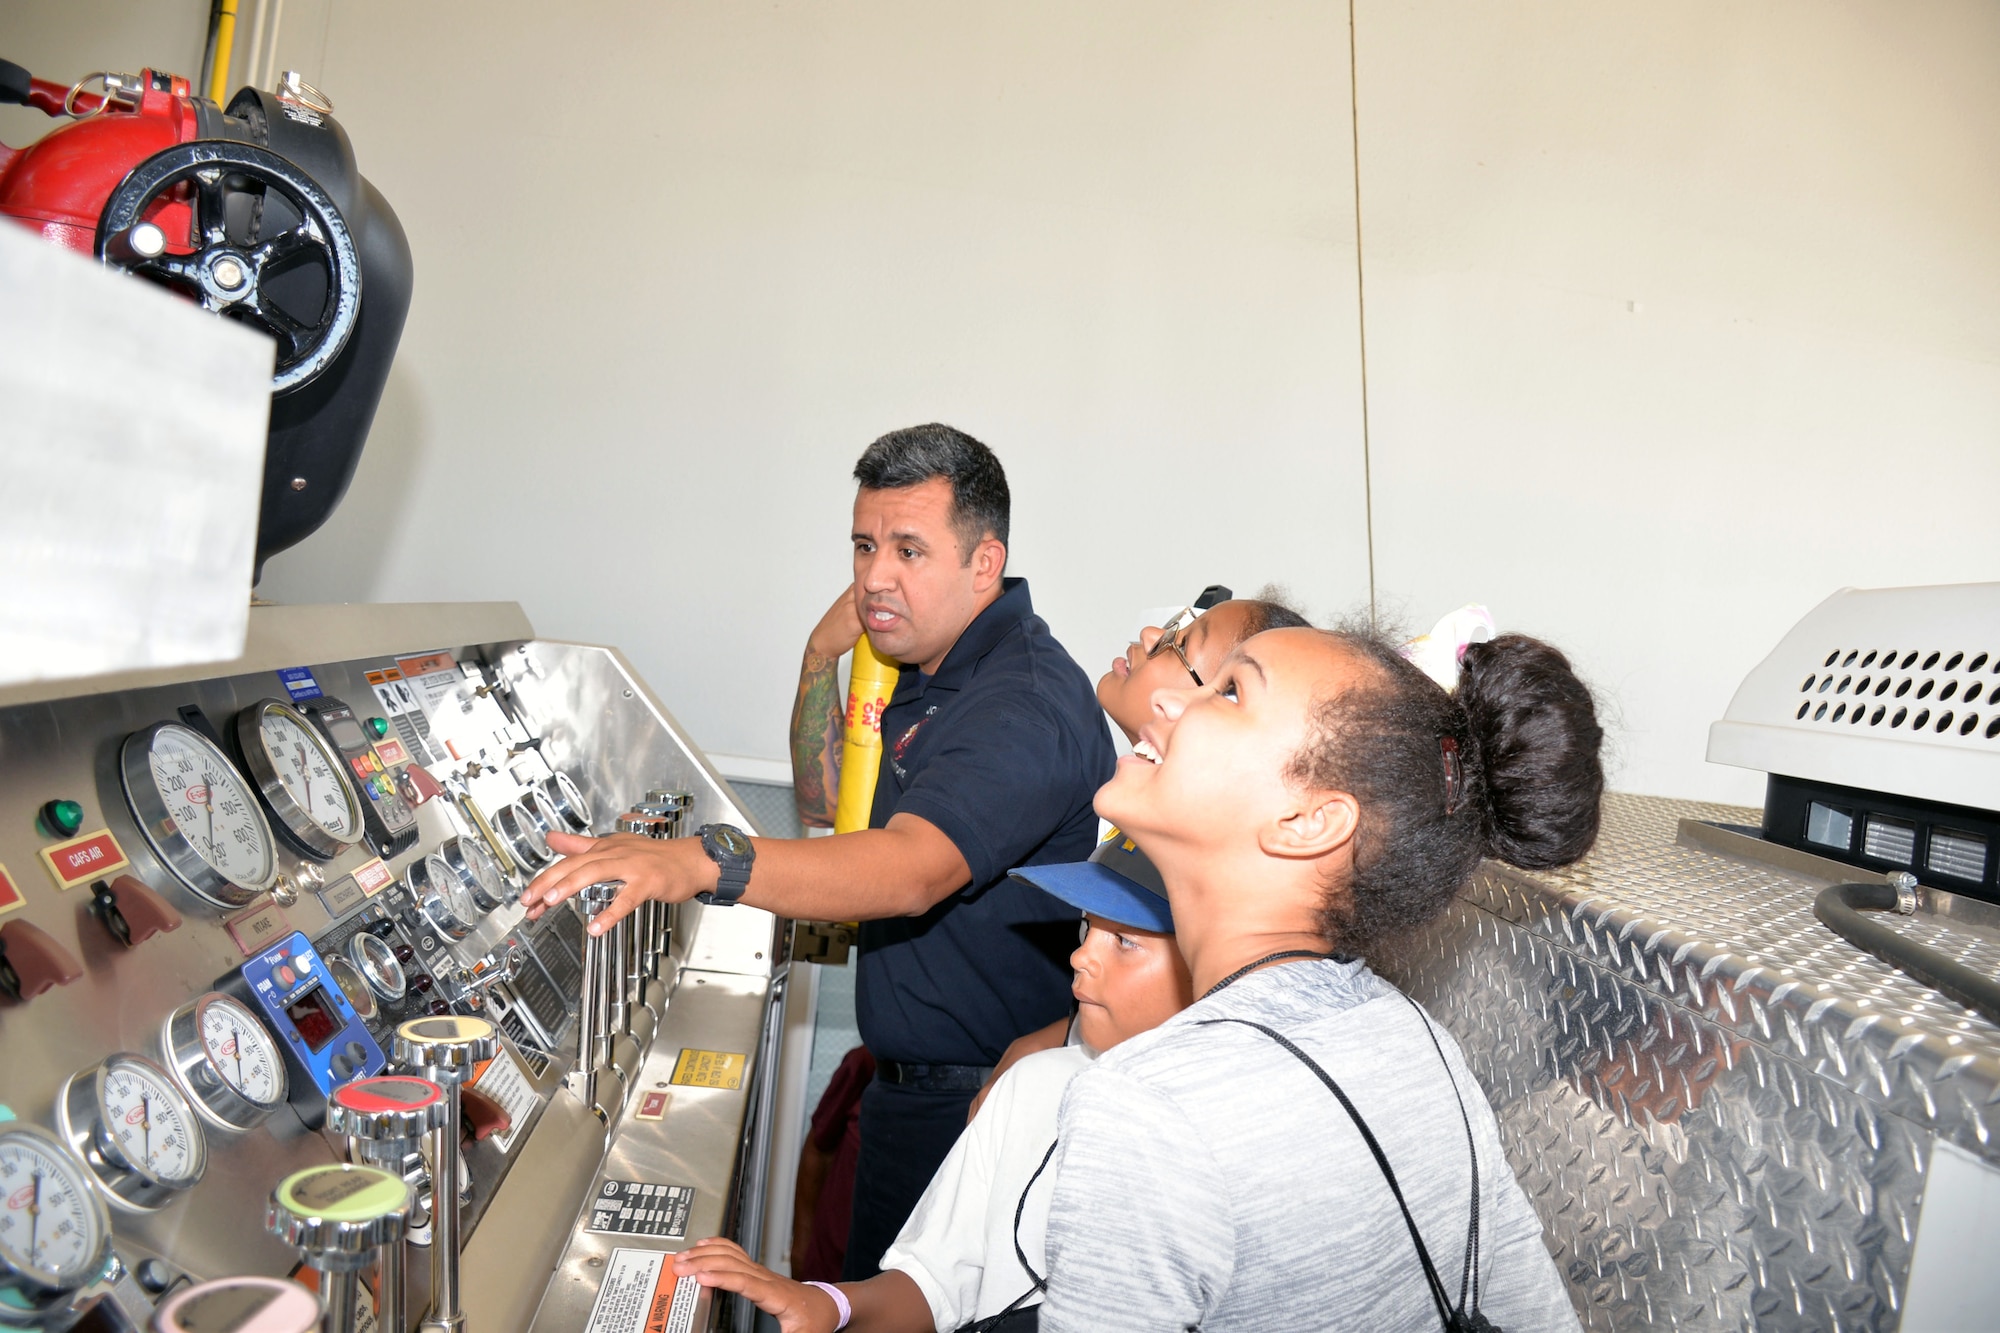 Mike Vigil, 802nd Civil Engineer Squadron firefighter, explains the controls for a fire engine to students with the San Antonio Chapter of Tuskegee Airmen Inc.’s Youth Science, Technology, Engineering and Mathematics-Aviation Program during a tour of Fire Station #1 July 12, 2019 at Joint Base San Antonio-Lackland, Texas.